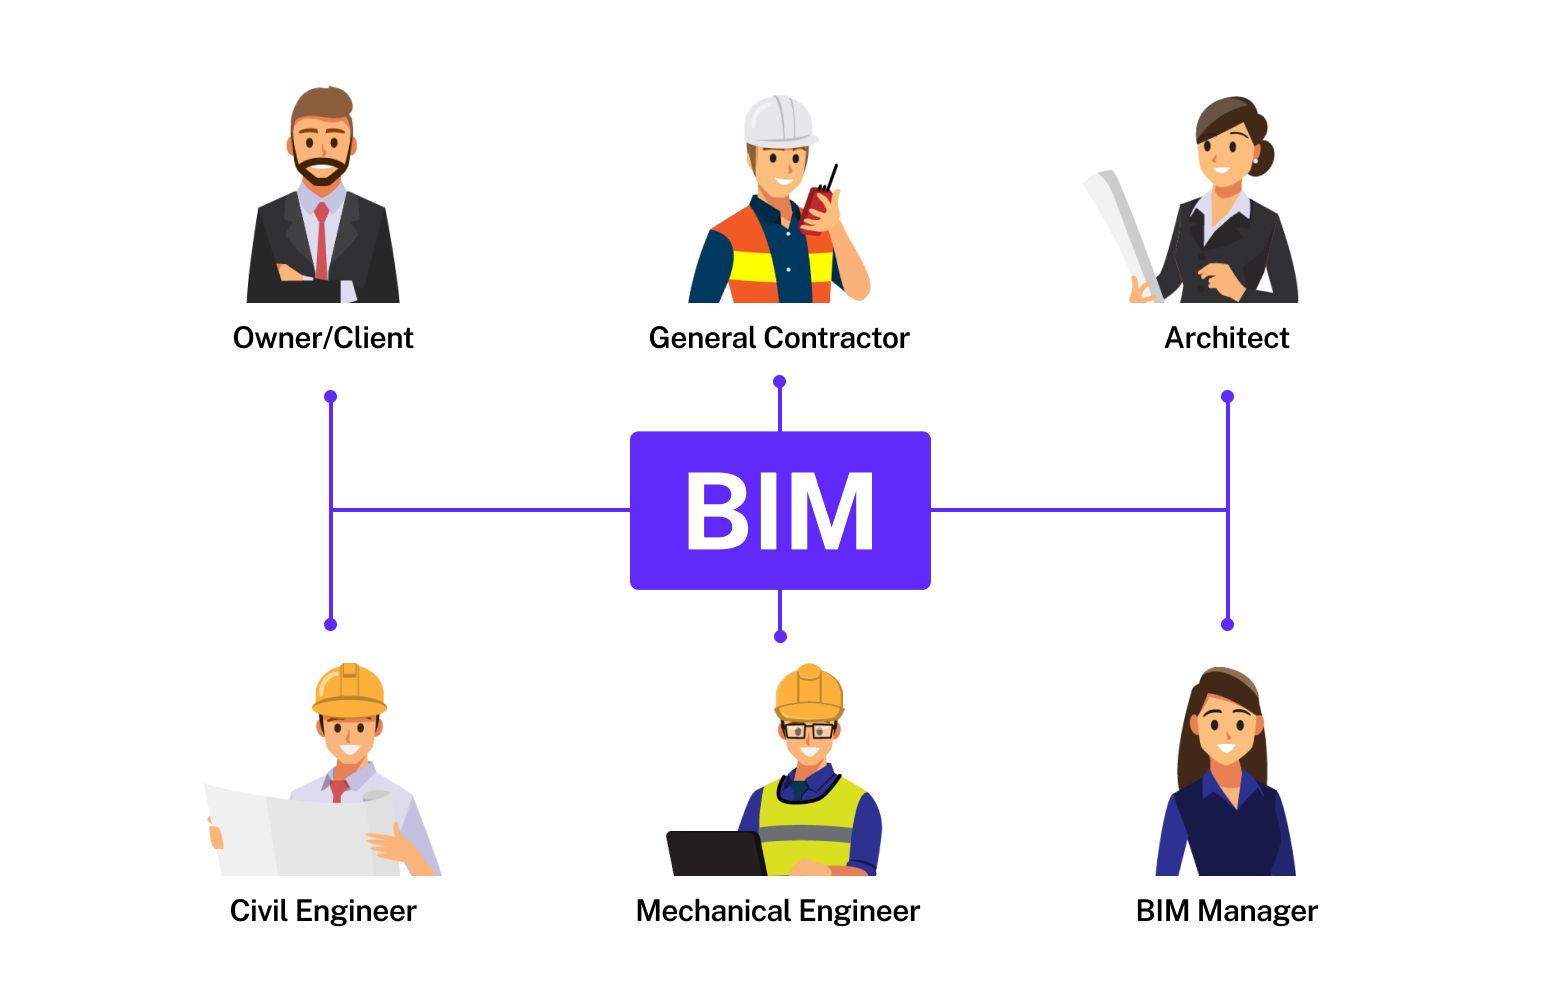 BIM allows seamless collaboration across various disciplines in the AEC Industry